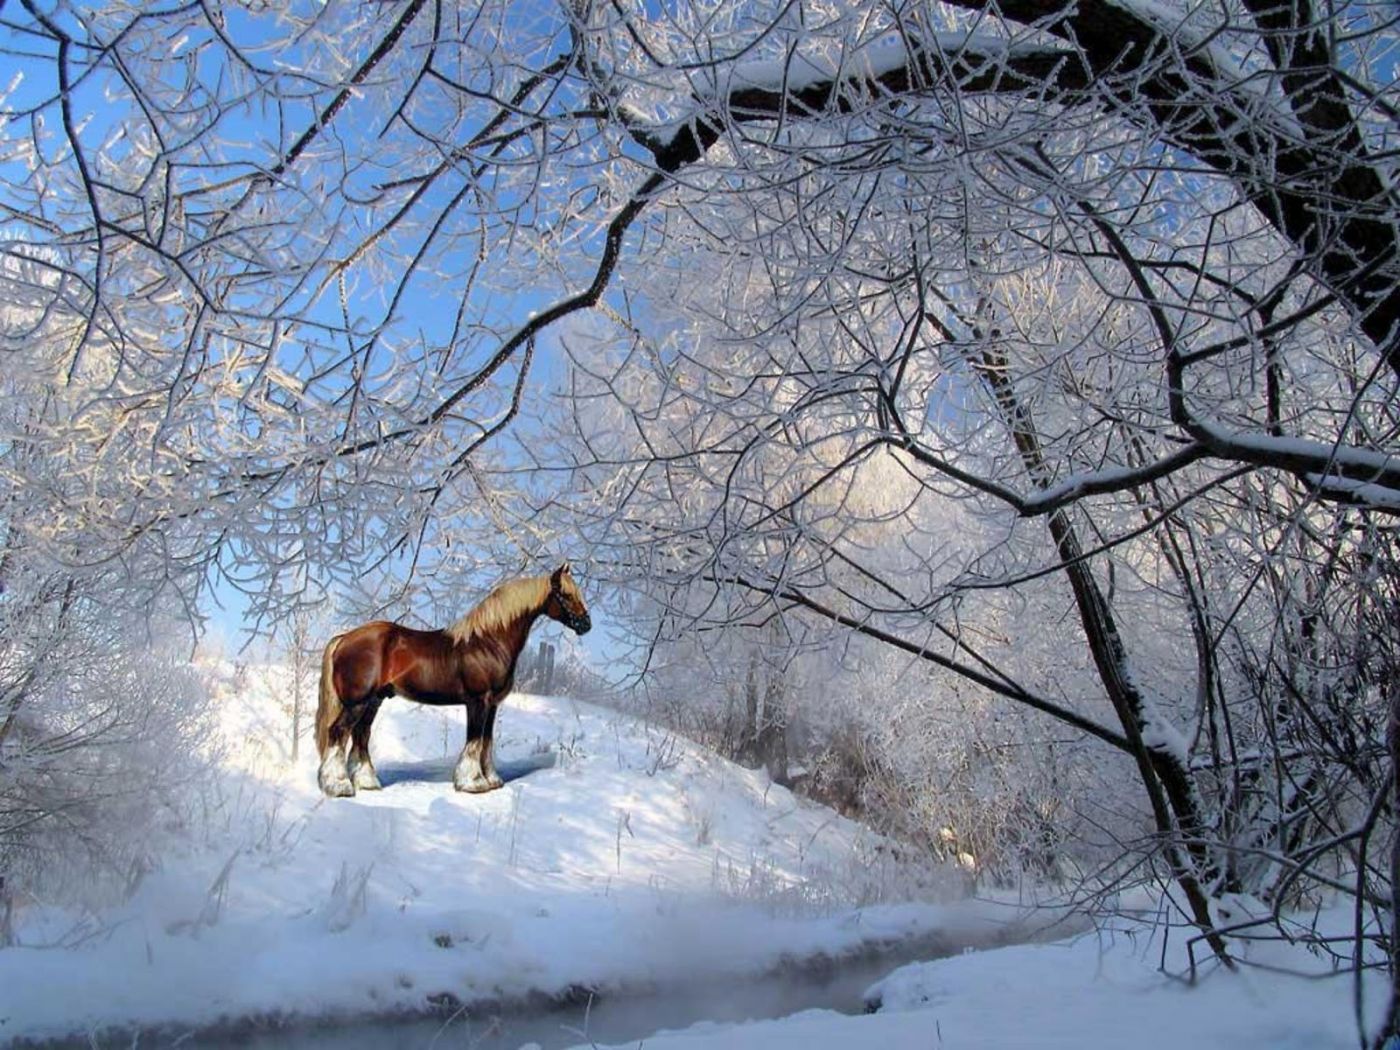 Archive Brown Horse Winter Snow Wallpaper